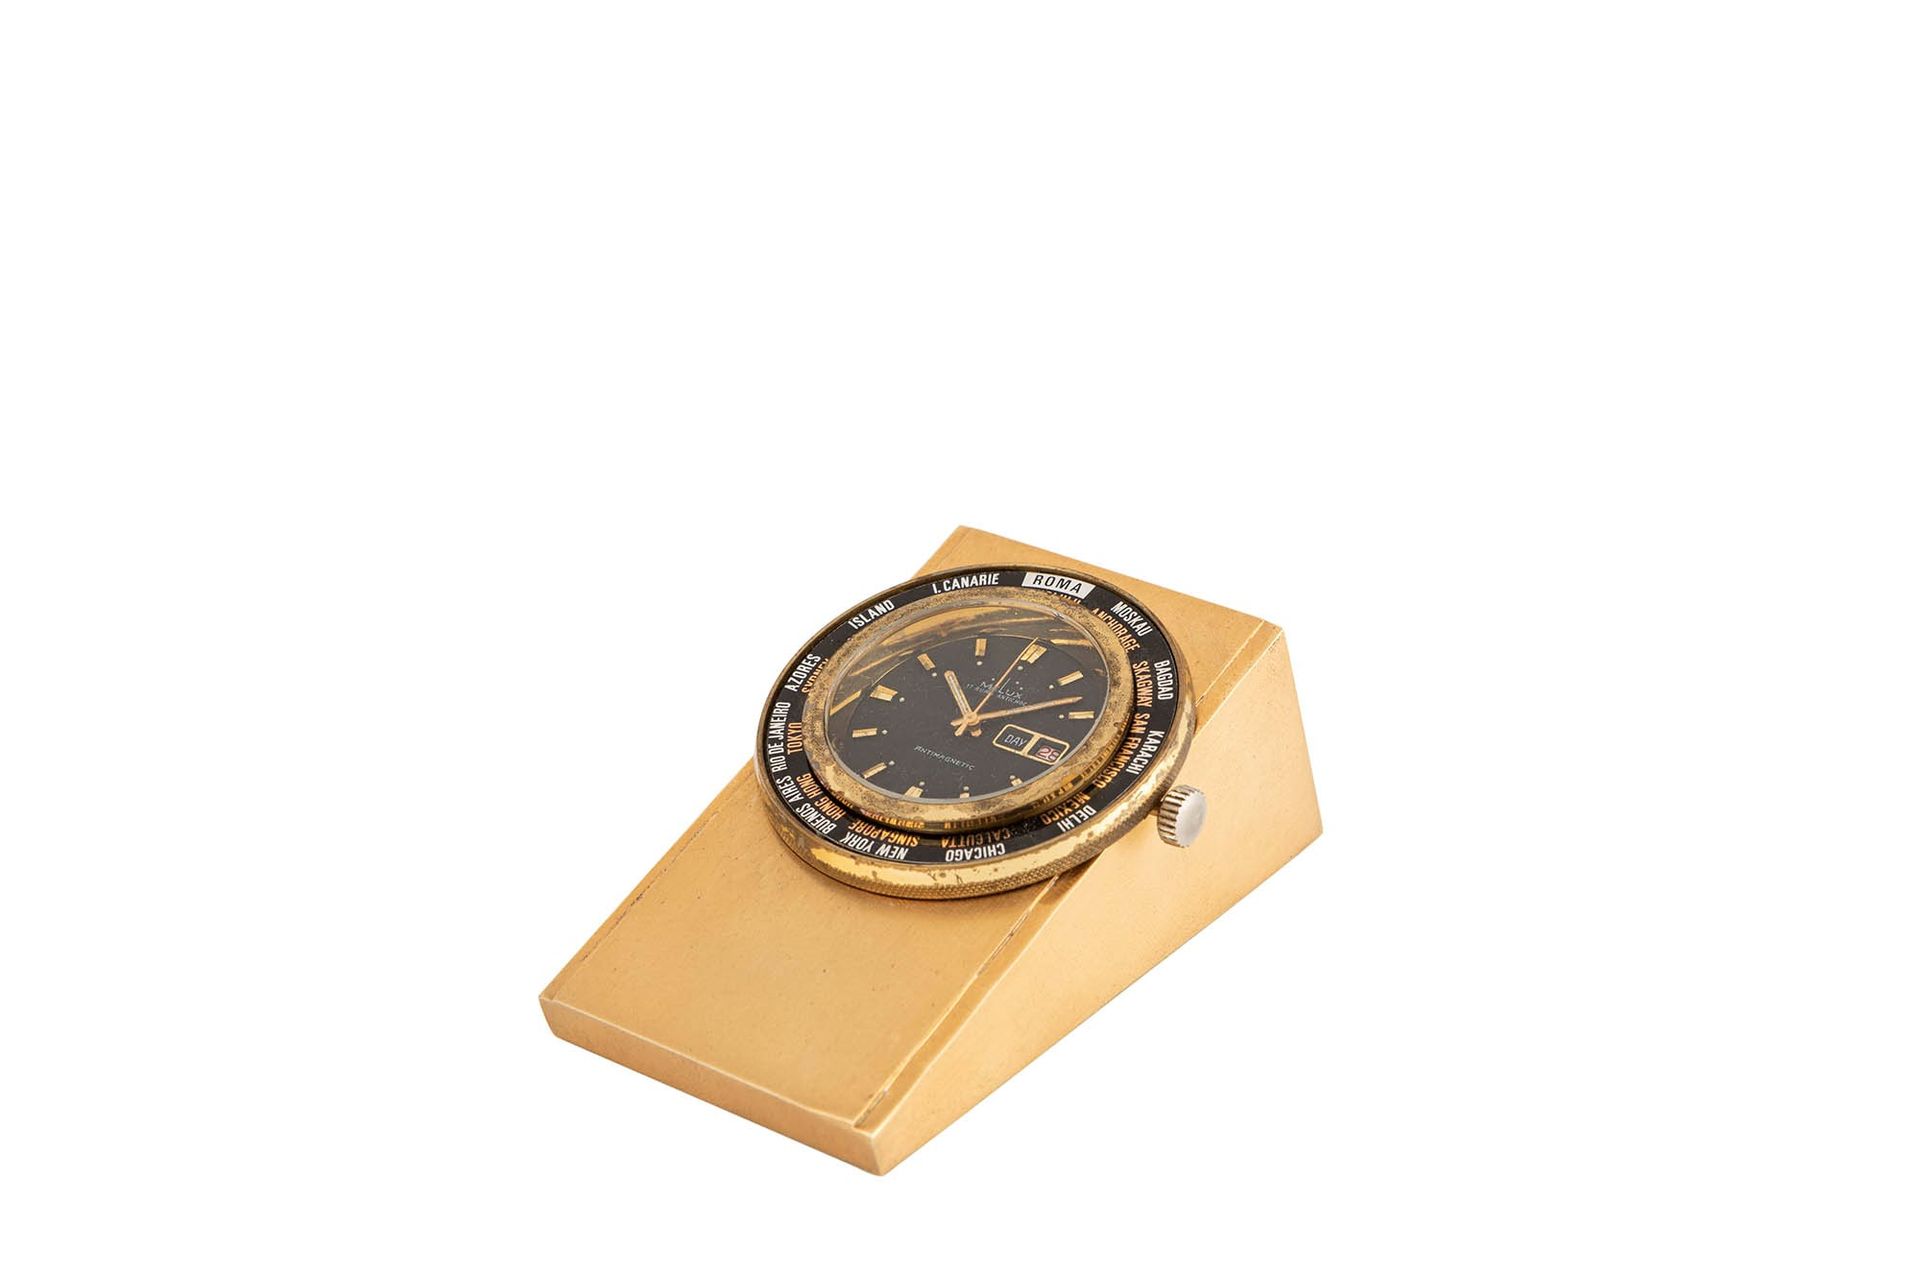 Melux Melux desk clock paperweight with day, date and worldtimer, '60s


Gilded &hellip;